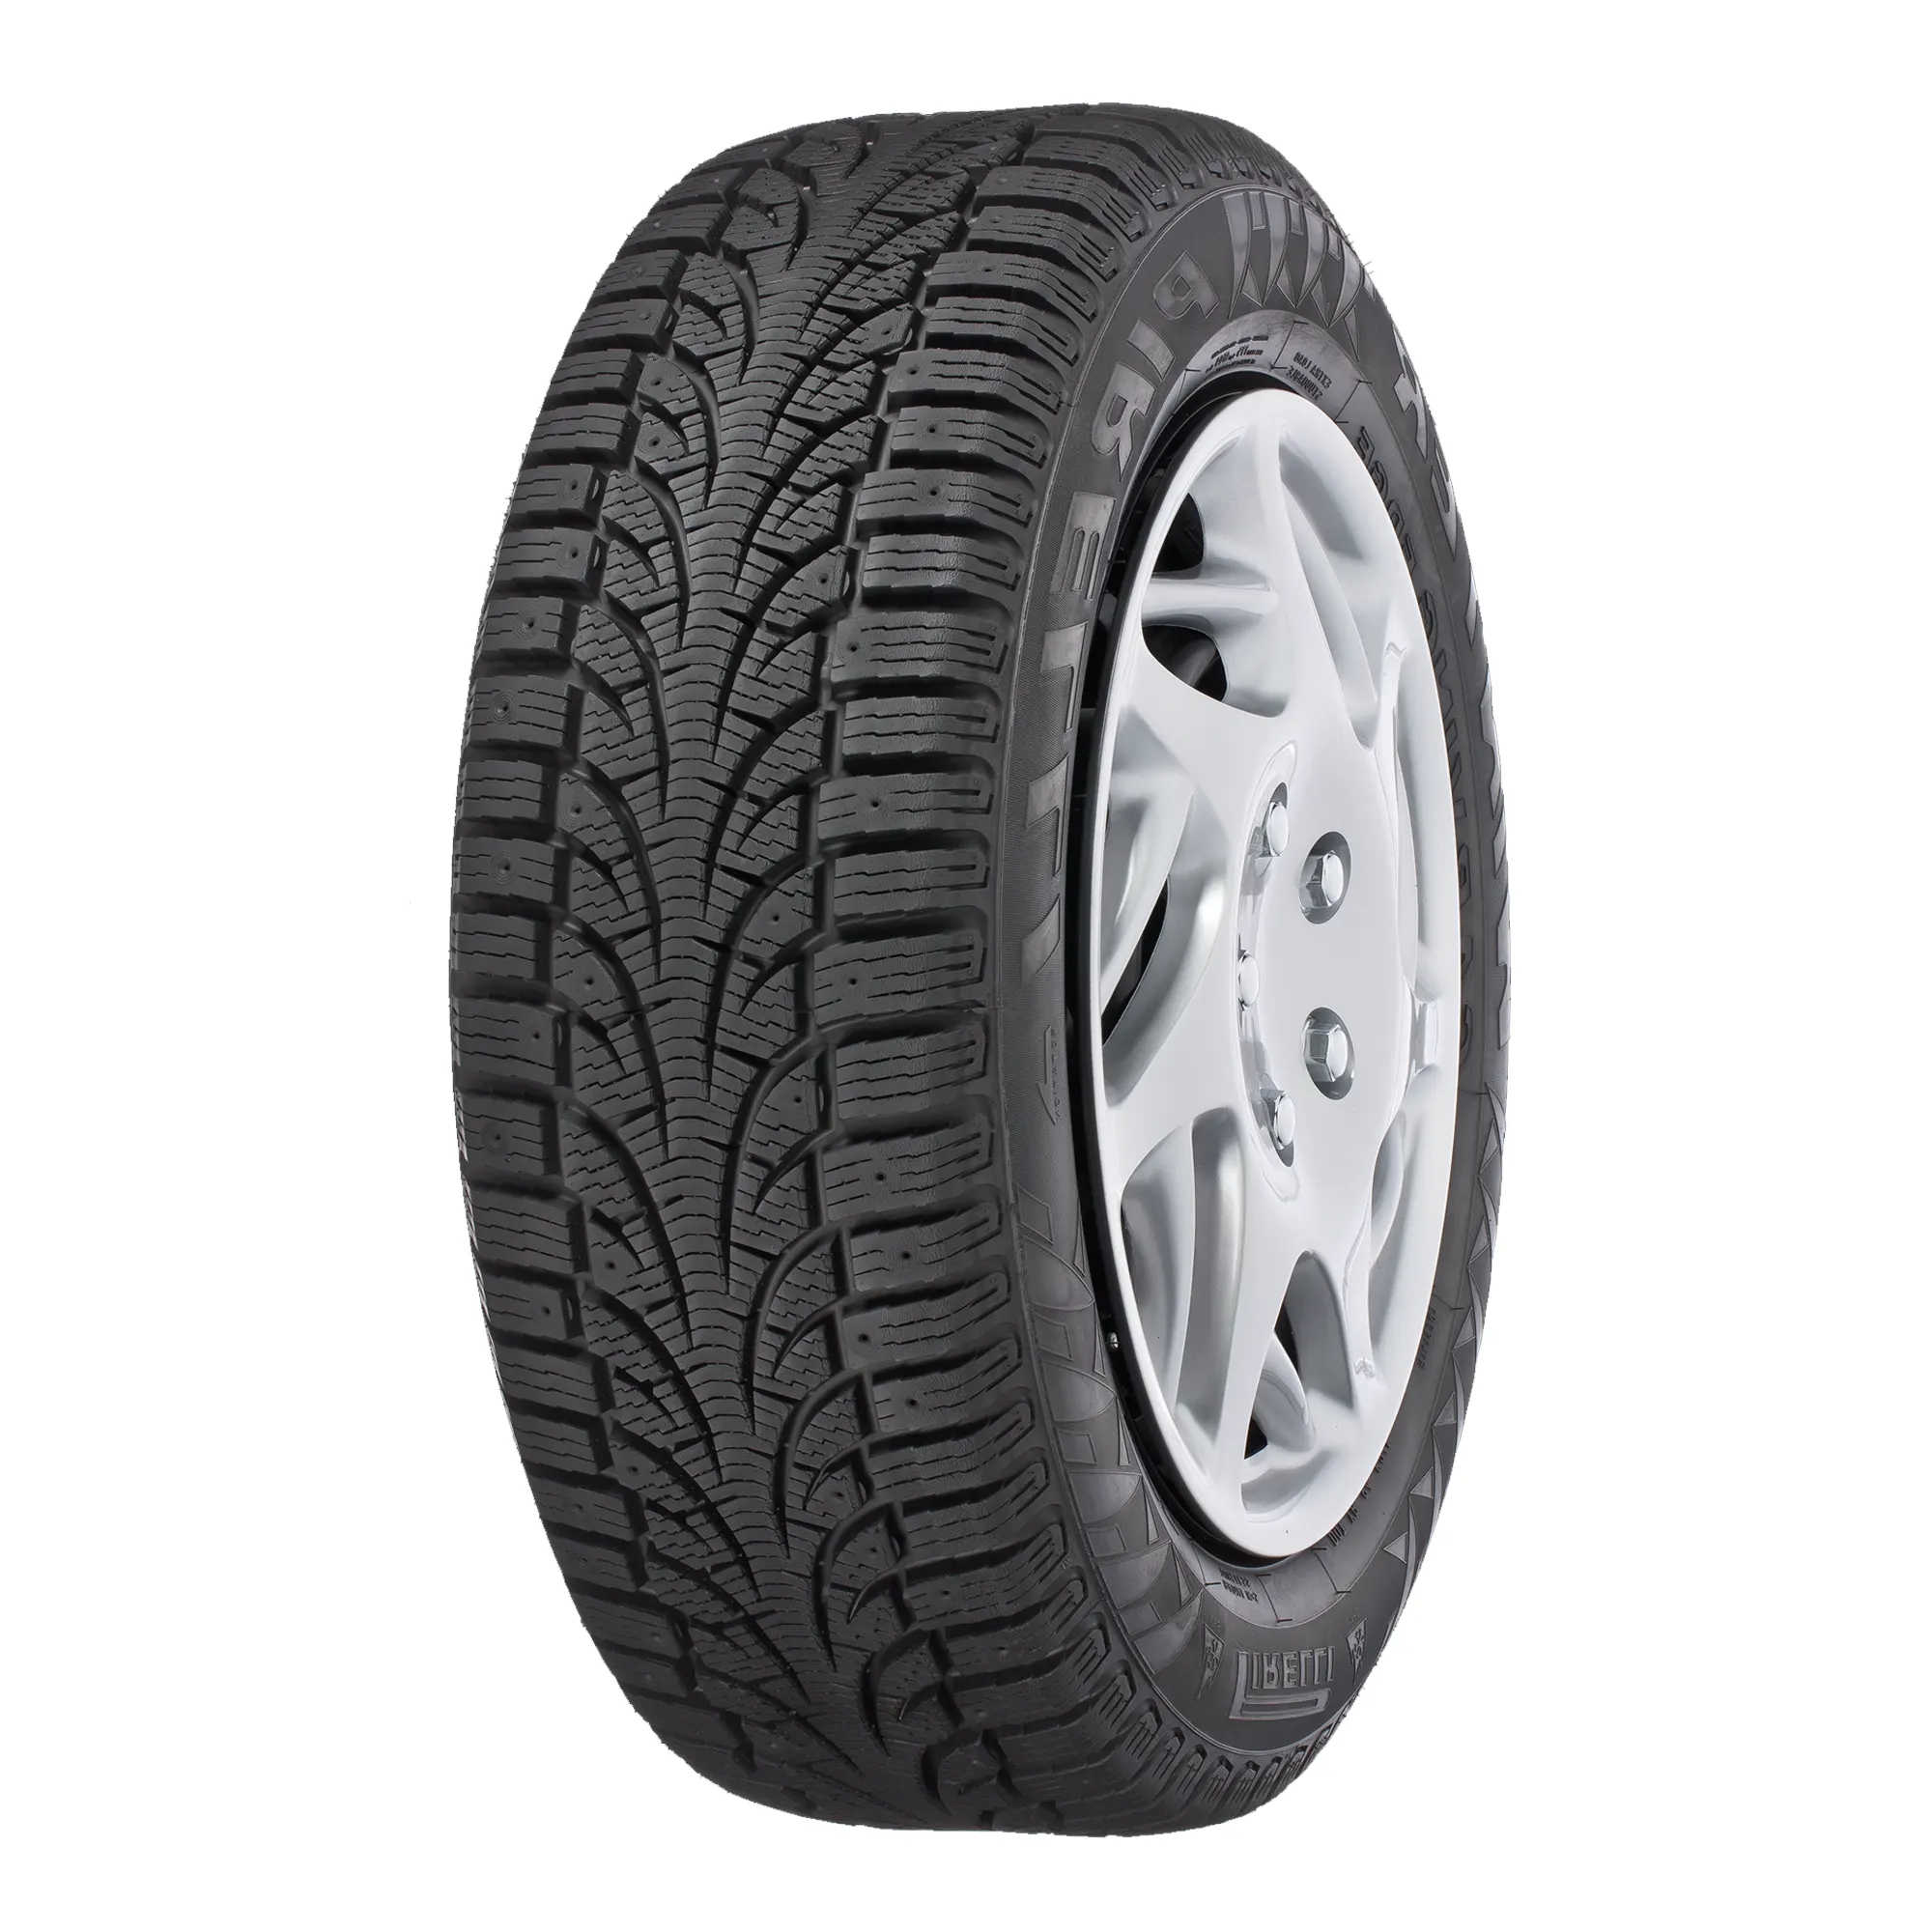 Шина 215/60R16 99T WINTER CARVING XL